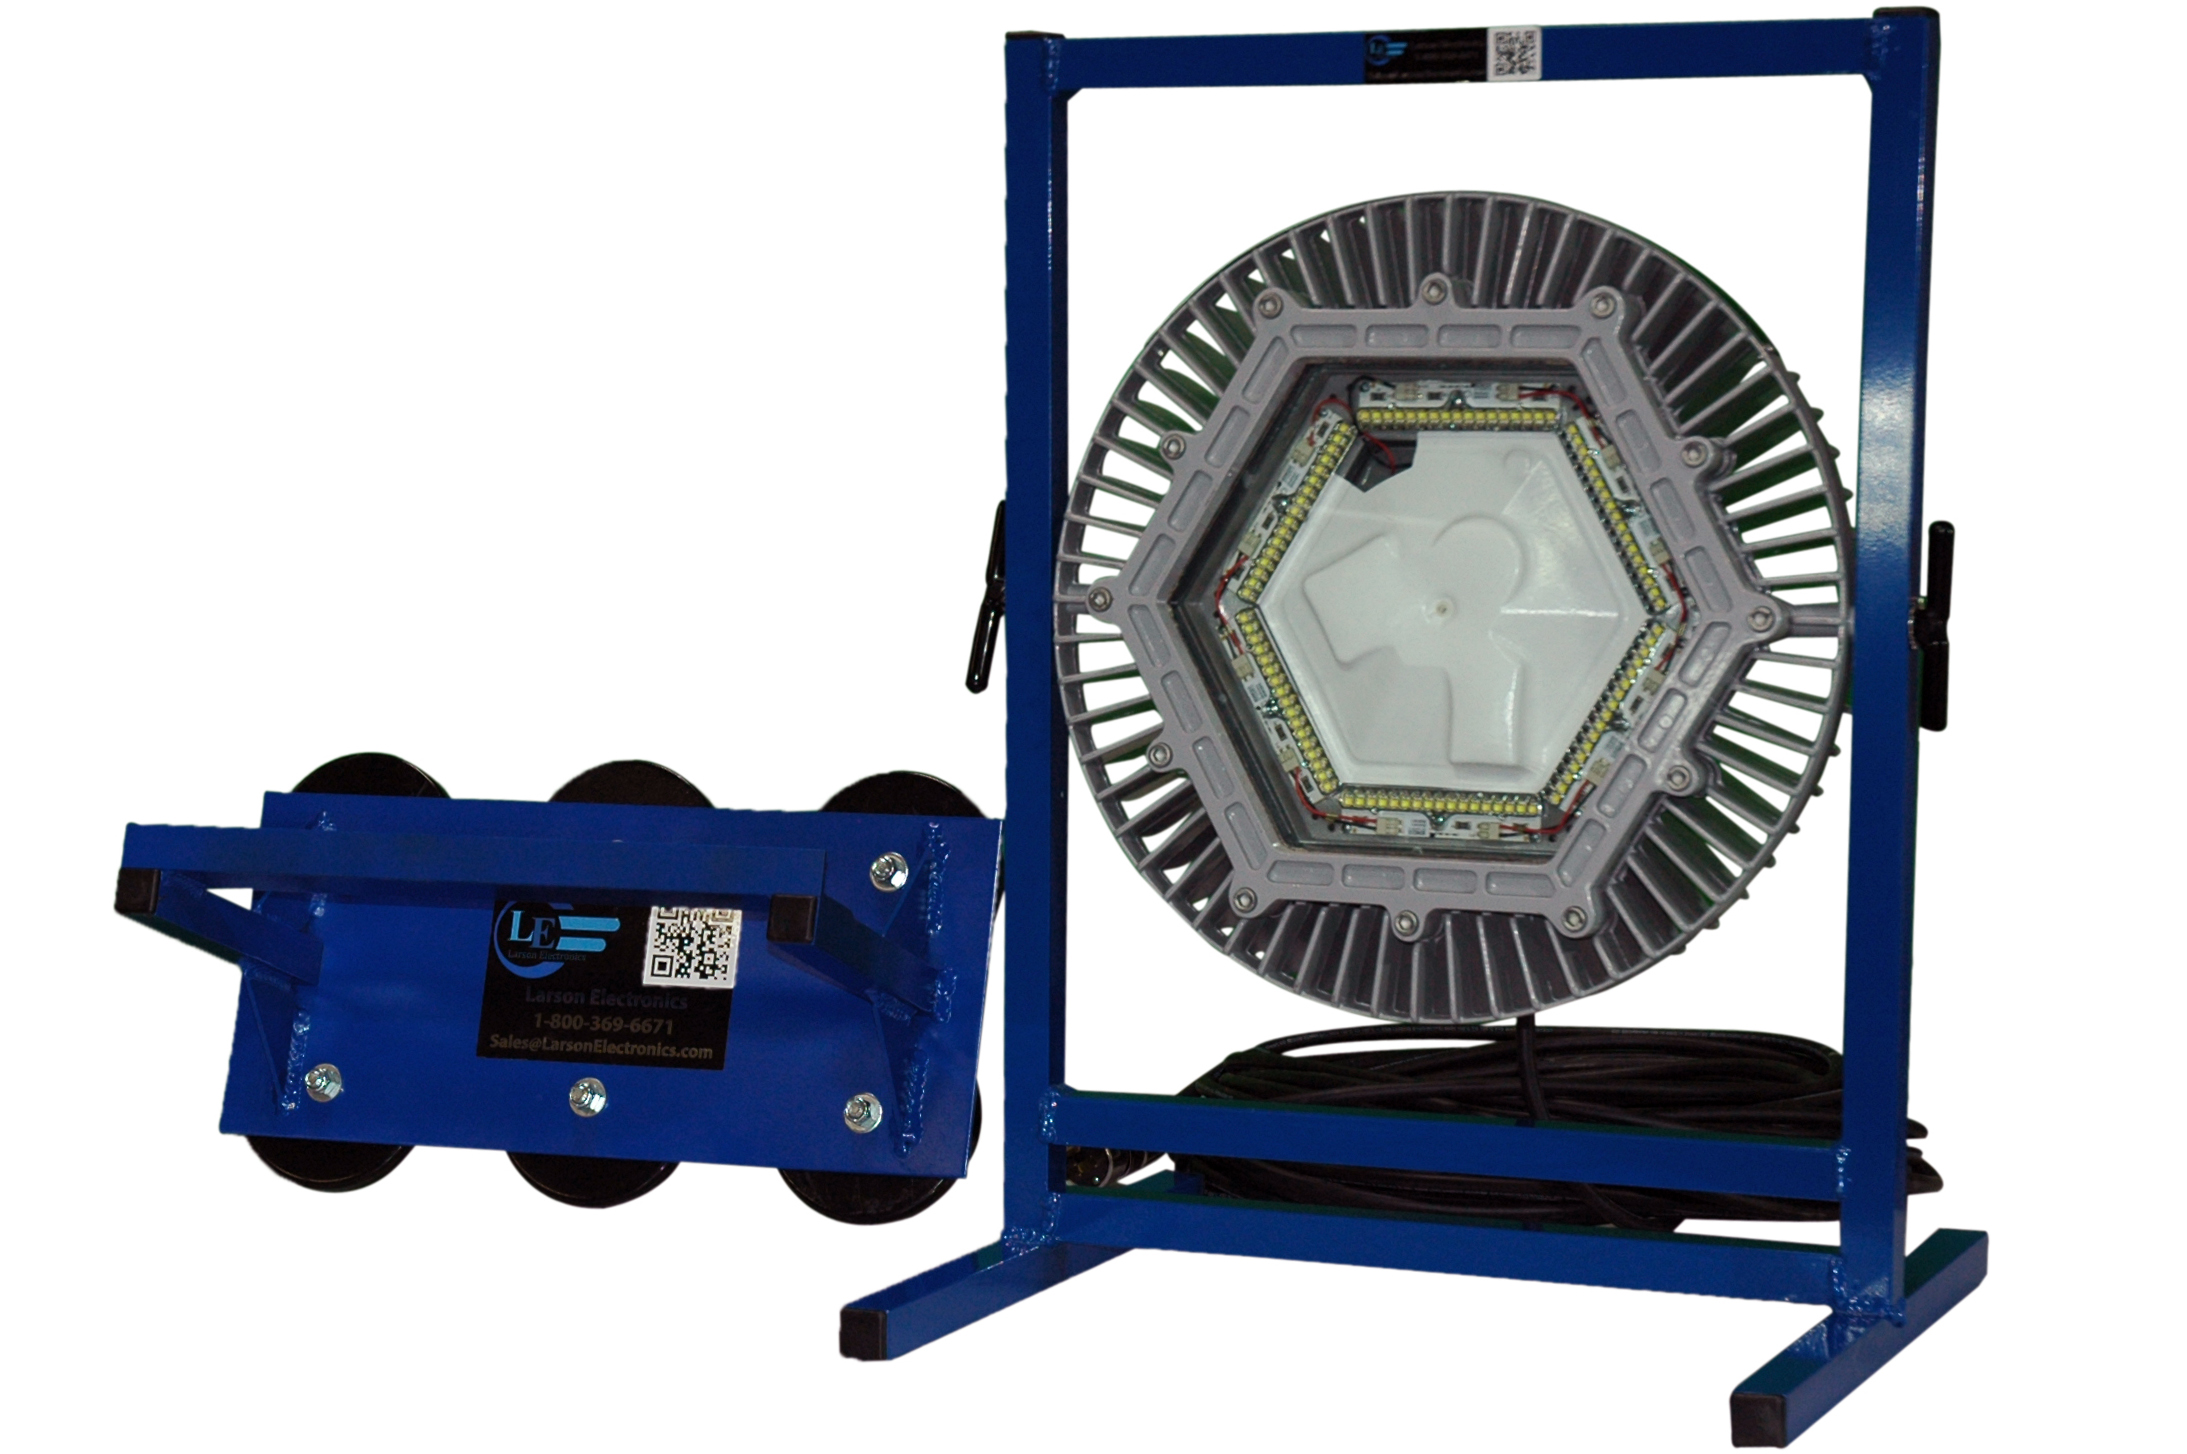 Class 1 Division 1-2, Class 2 Division 1-2 Approved LED Work Light